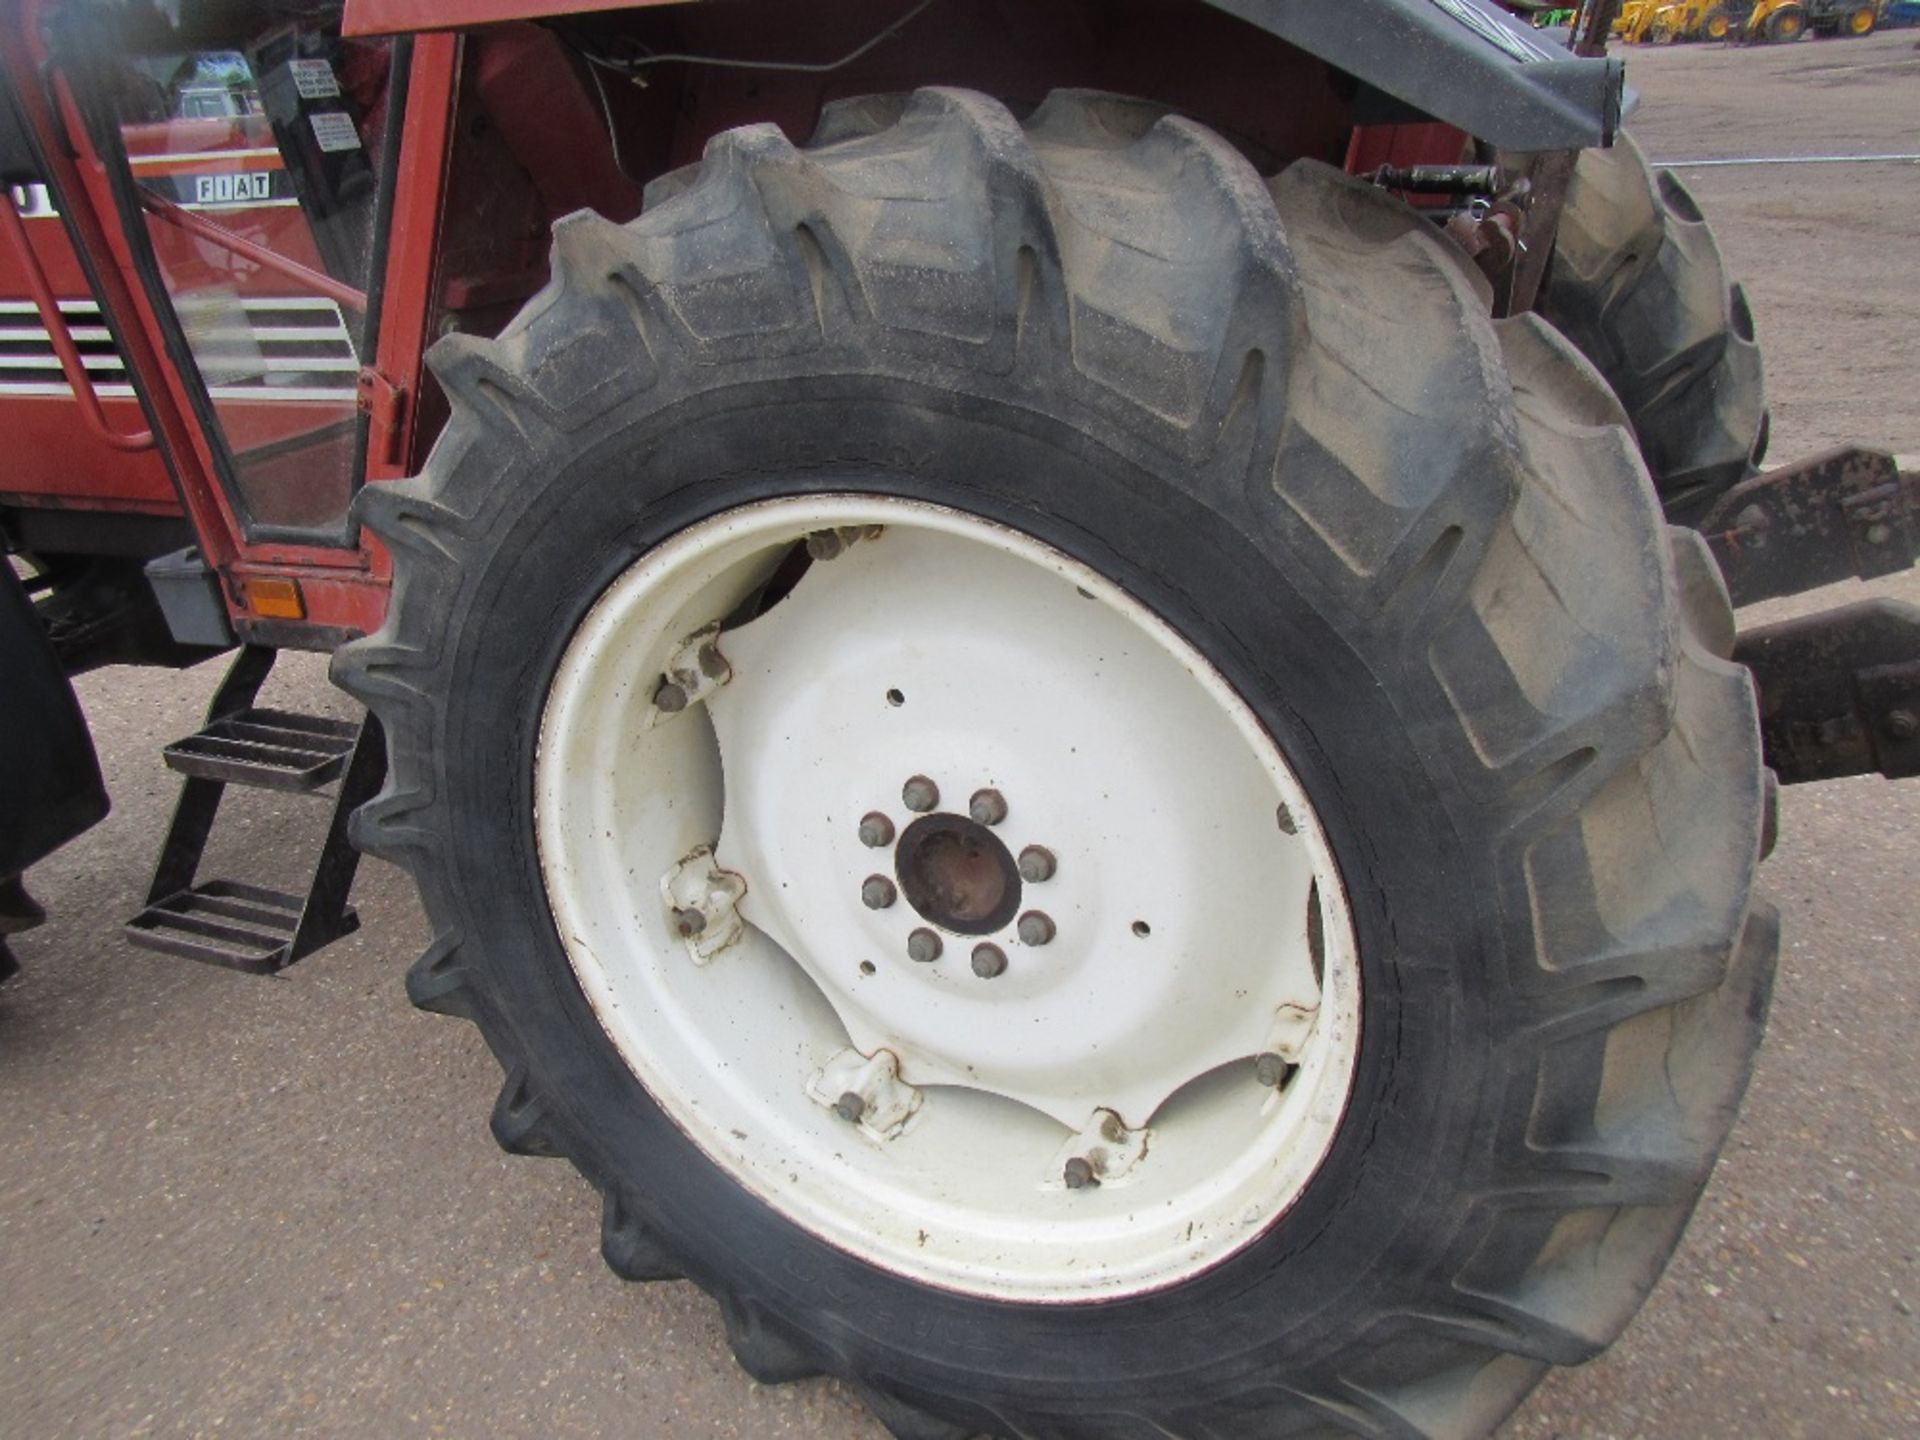 Fiat Tractor 90-90 DT 4wd Tractor. V5 will be supplied. Reg. No. F854 PHP Ser No 817899 - Image 10 of 16